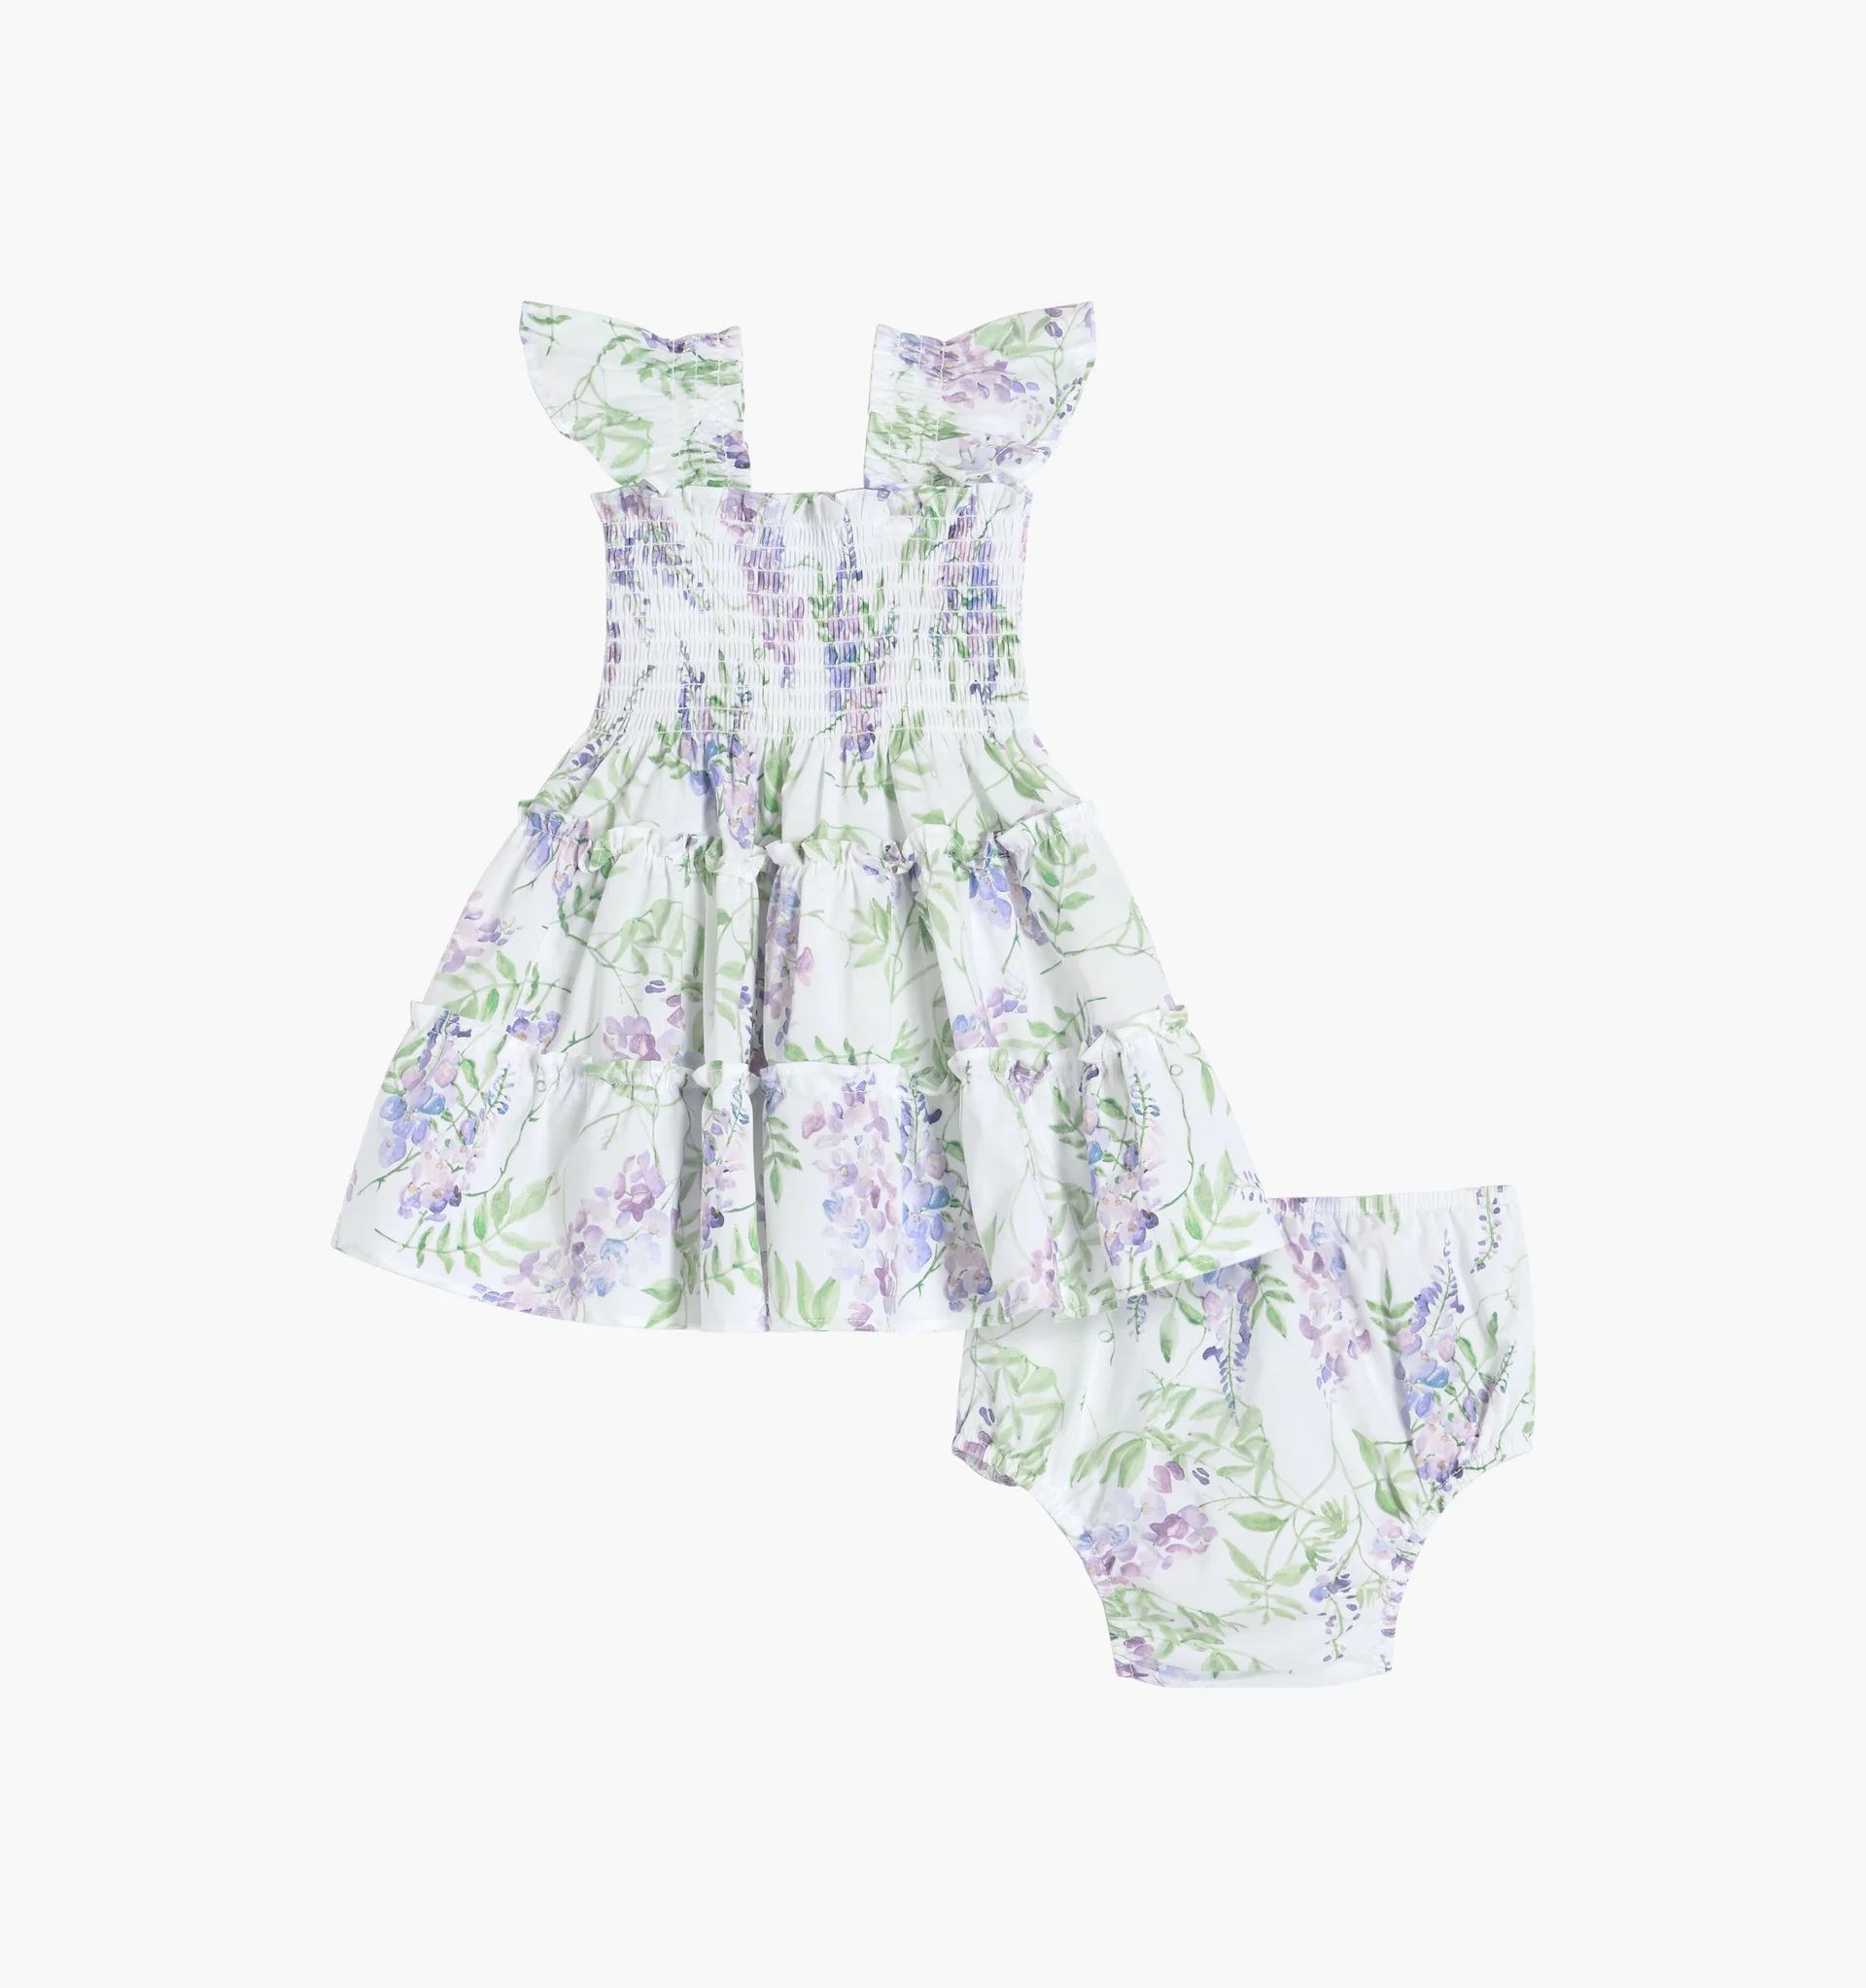 The Organza Baby Ellie Nap Dress - Spearmint/Lilac Floral Jacquard | Hill House Home